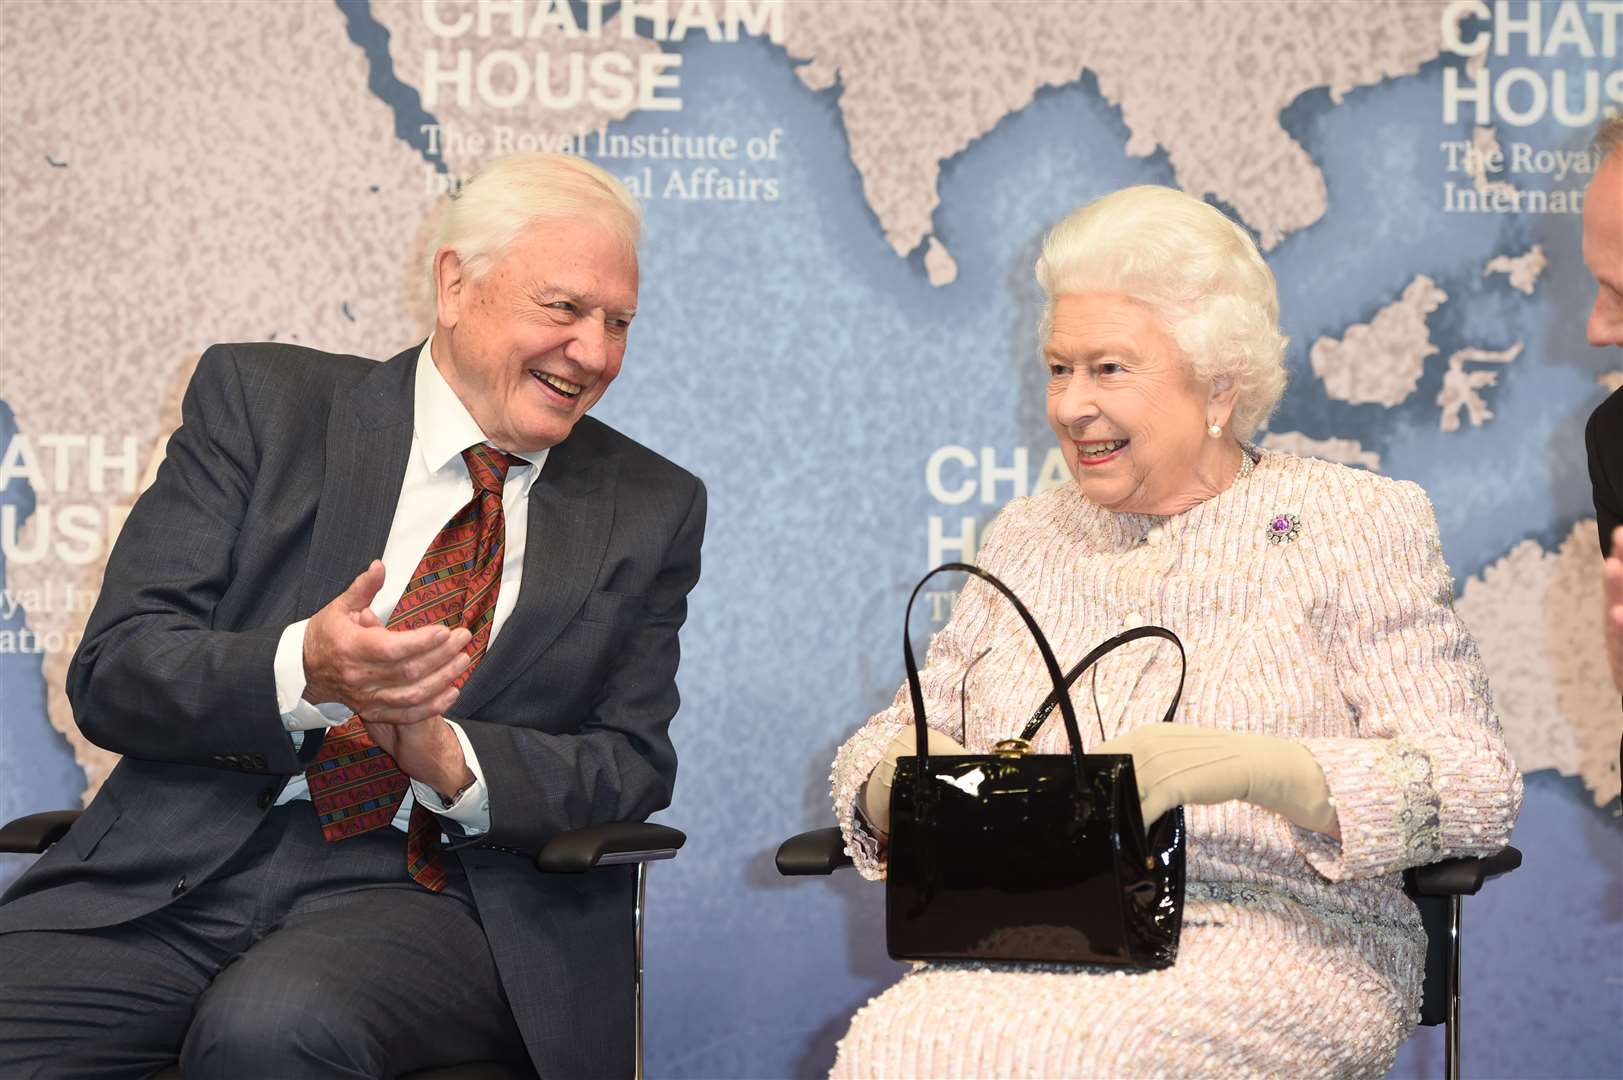 Queen Elizabeth II with Sir David Attenborough at the Royal institute of International Affairs in 2019 (Eddie Mulholland/The Daily Telegraph/PA)